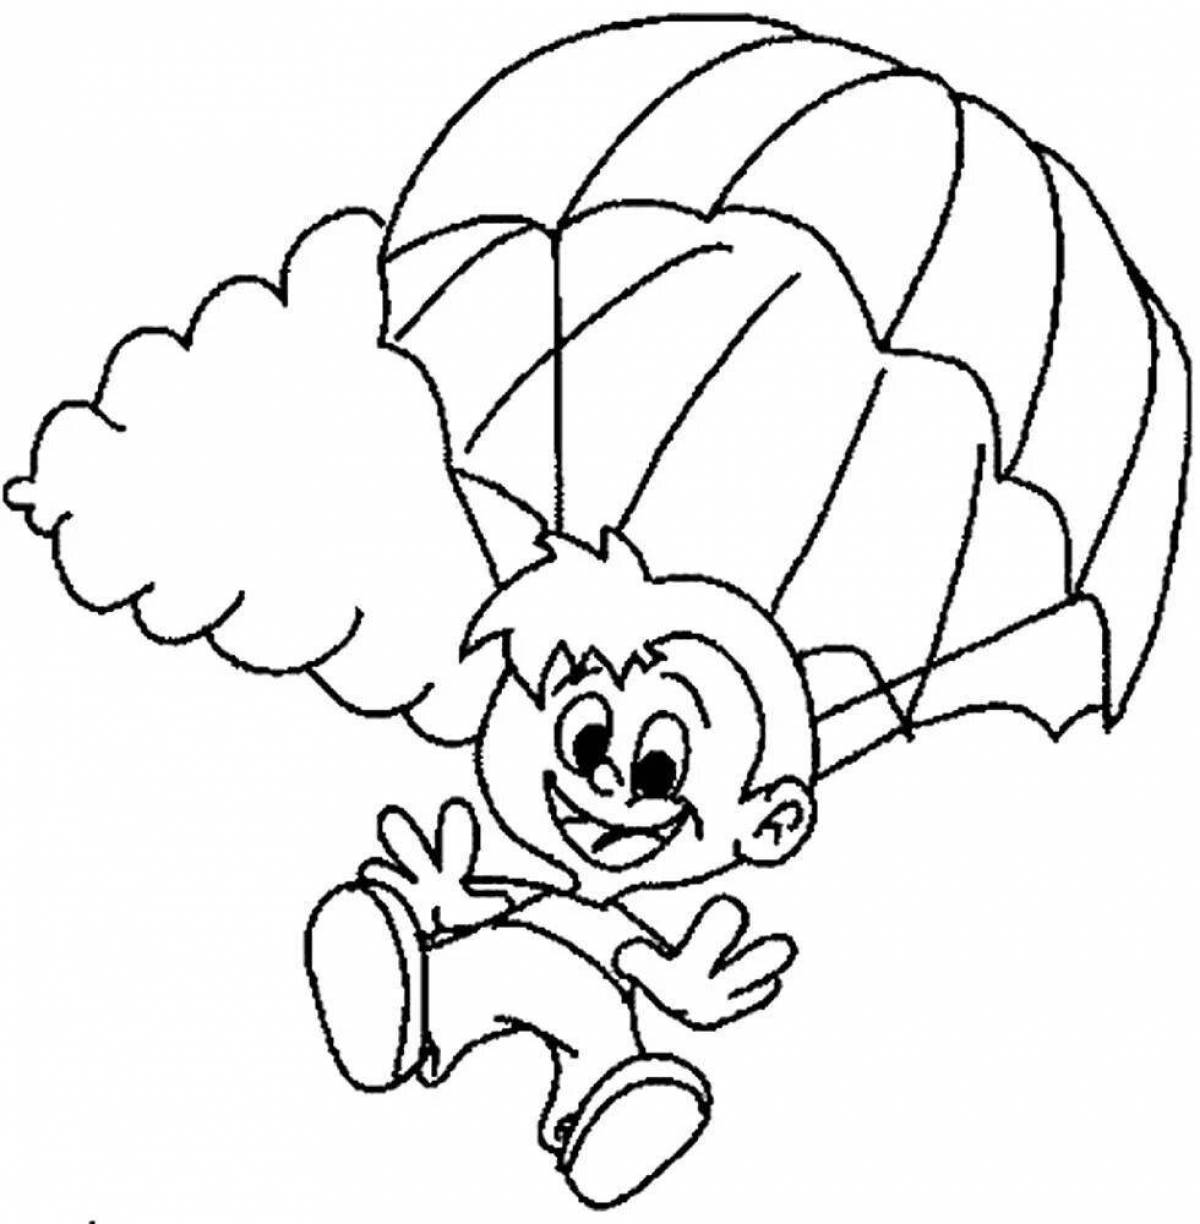 Intriguing skydiver coloring page